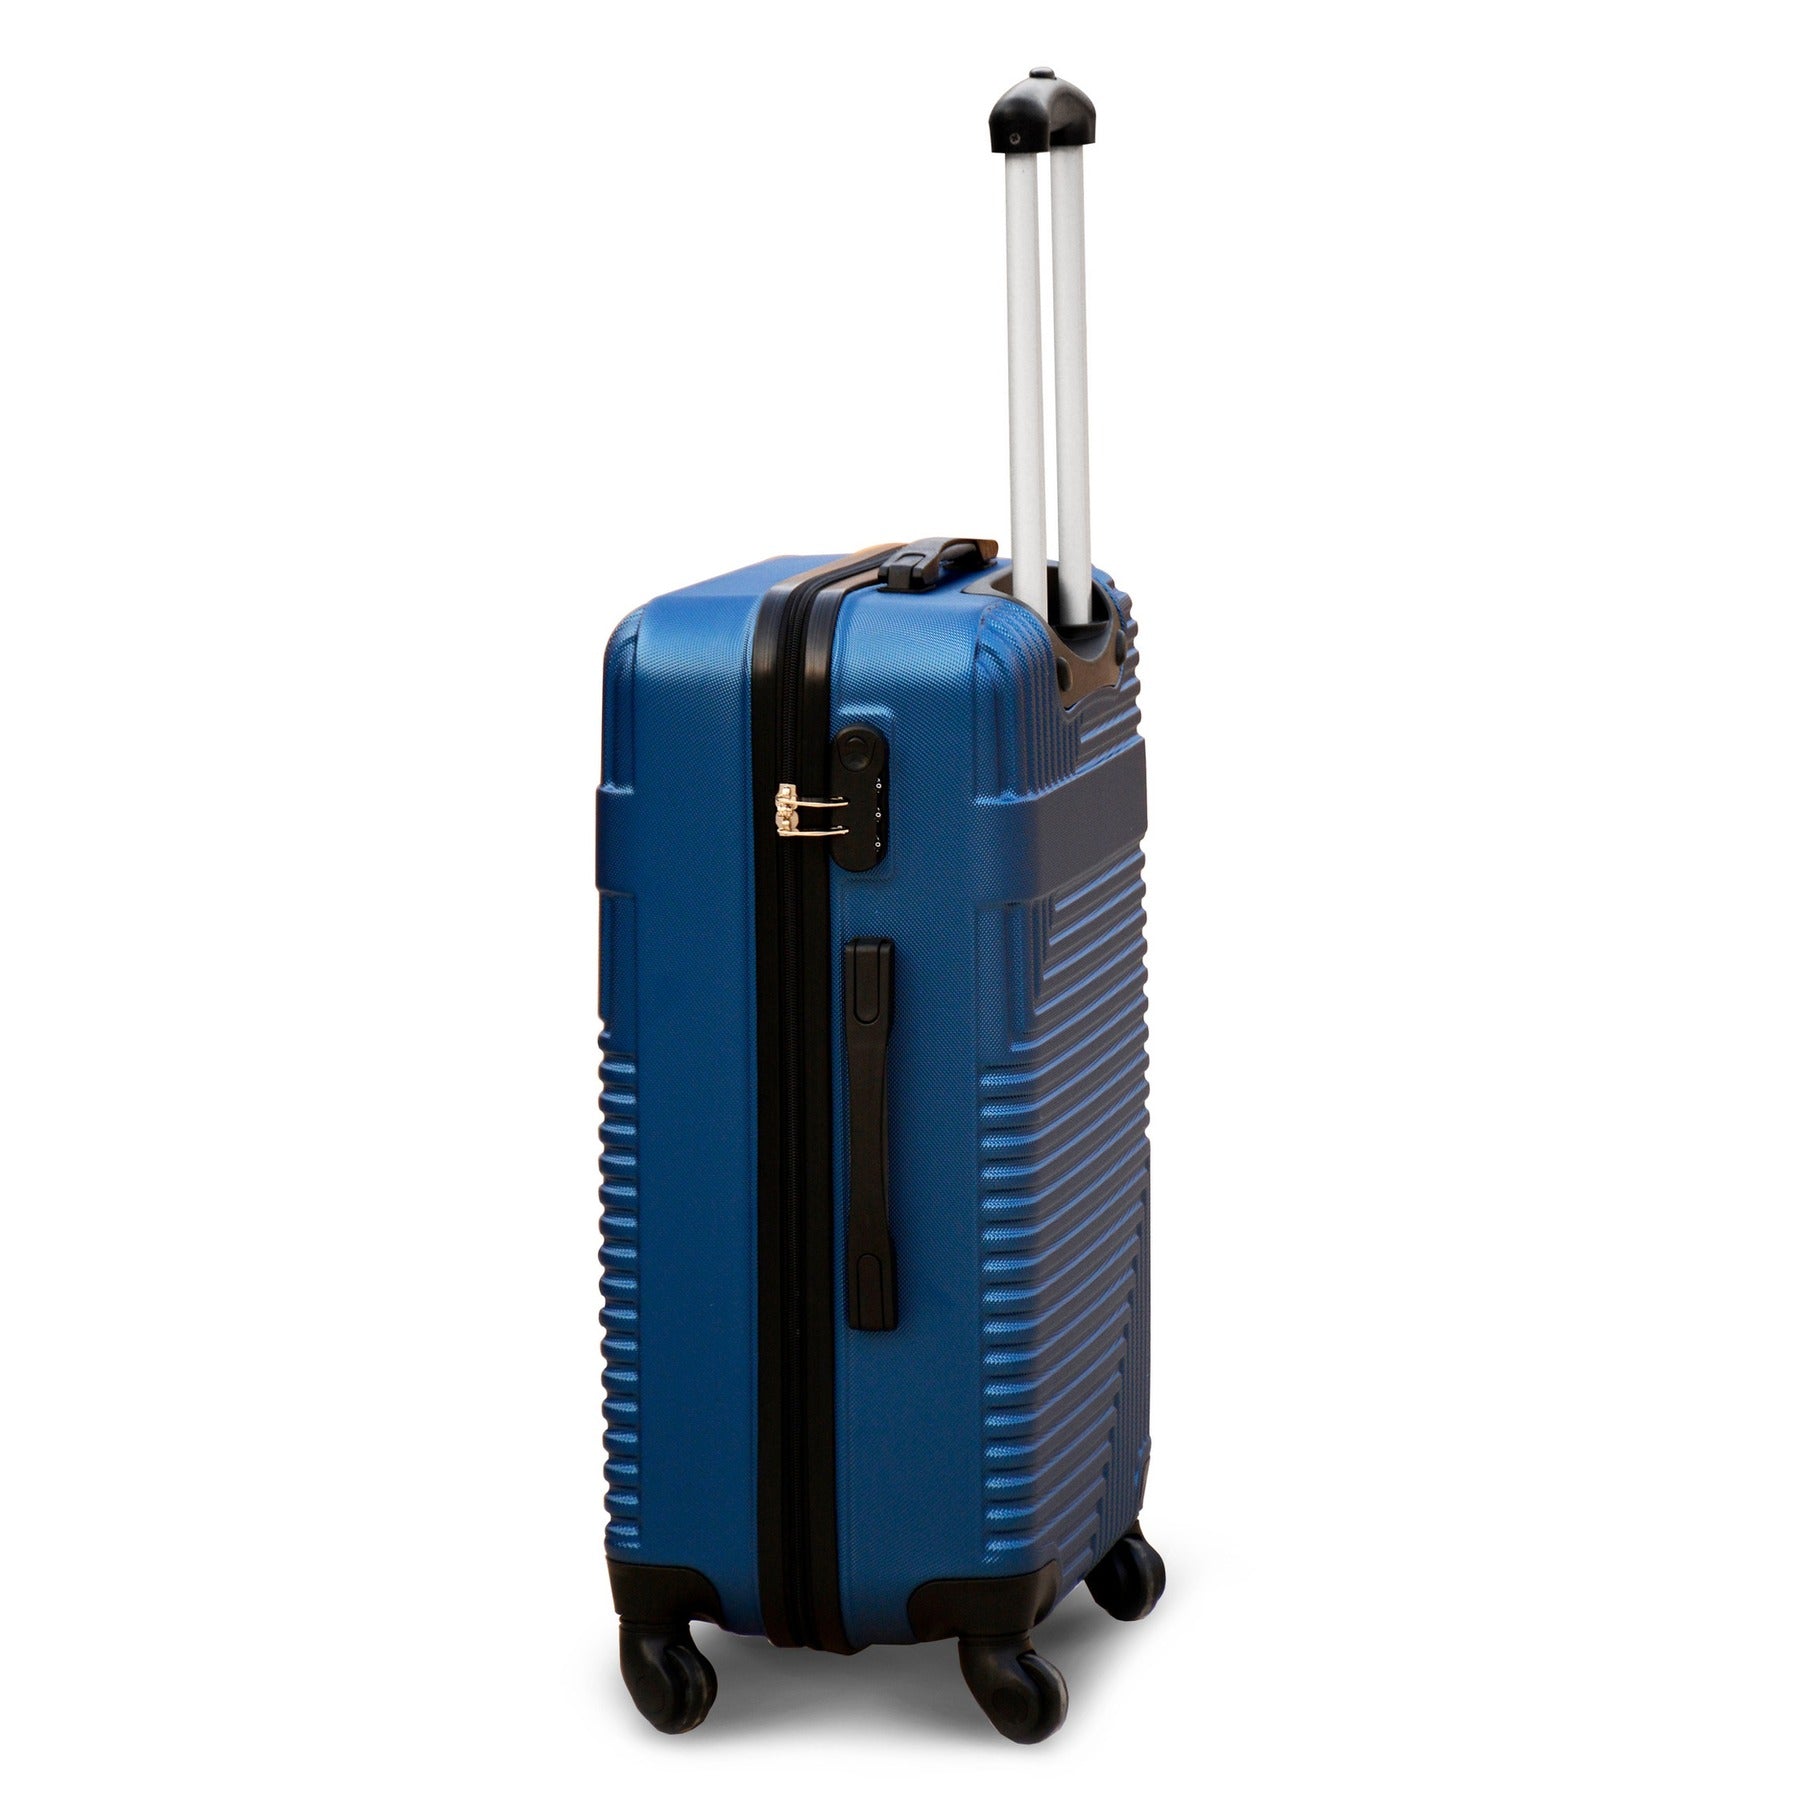 20" Blue Travel Way ABS Lightweight Carry On Luggage Bag With Spinner Wheel